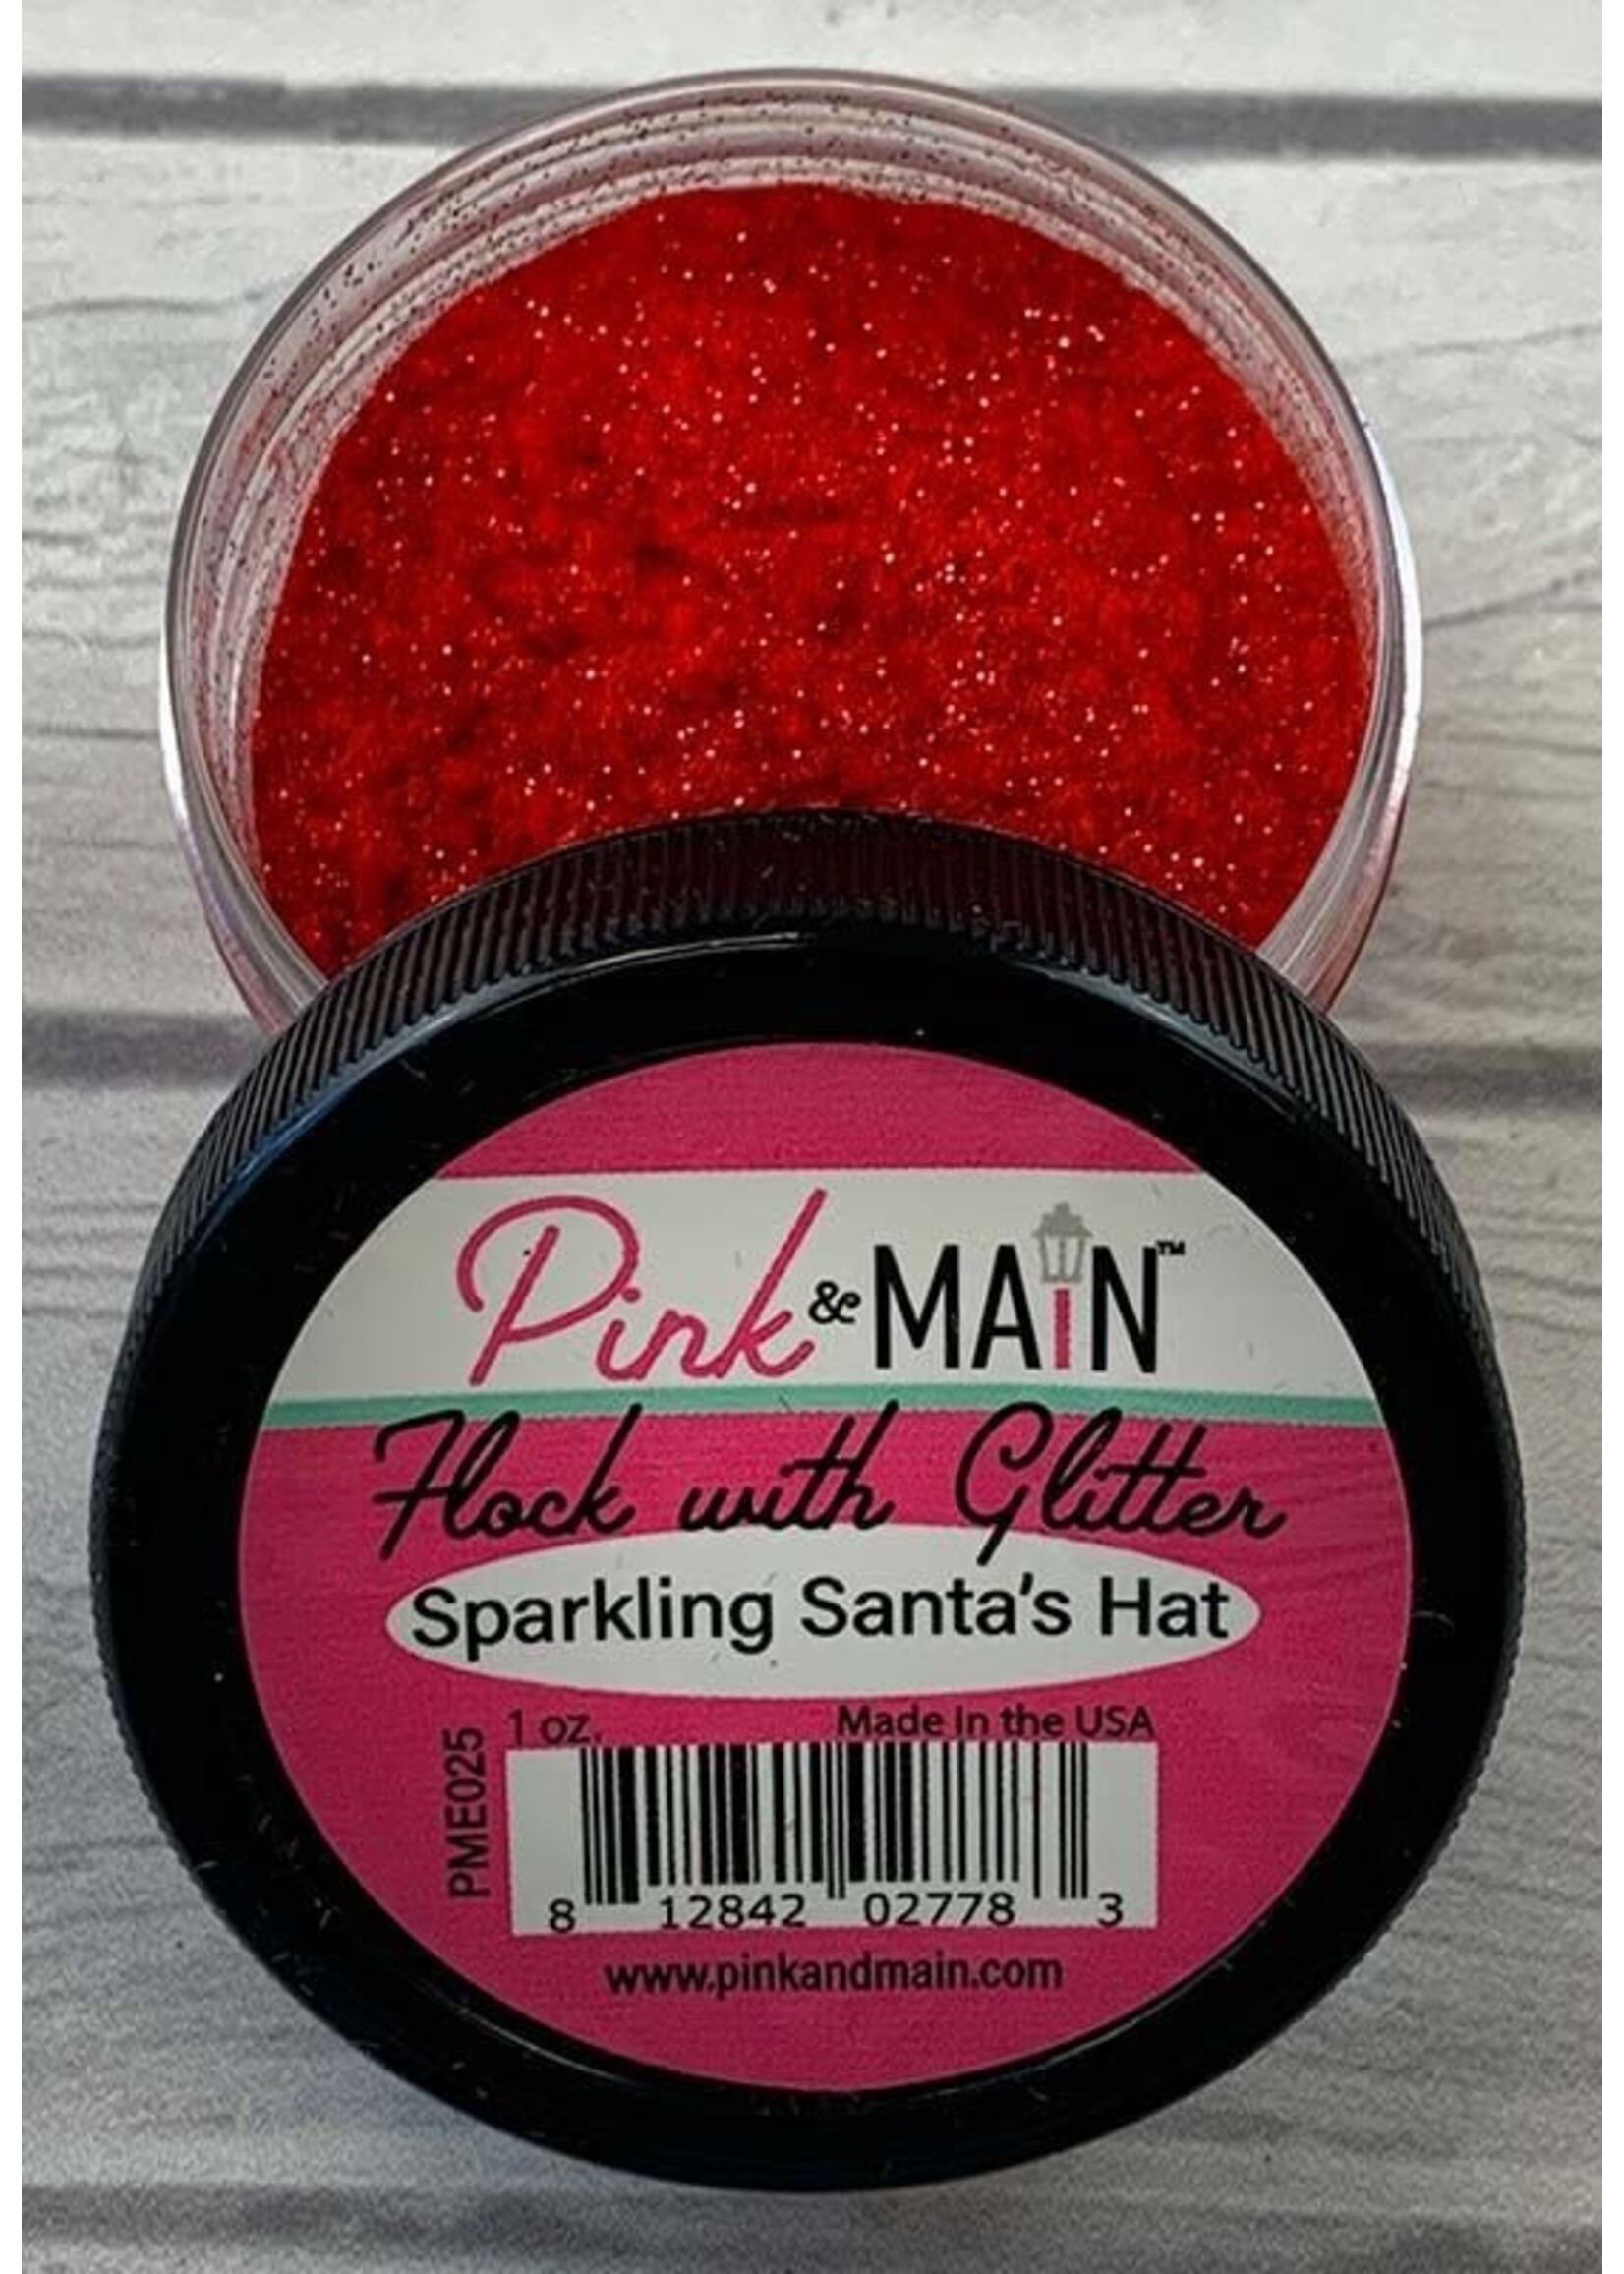 Pink & Main Pink & Main Flock with Glitter, Sparkling Santa's Hat